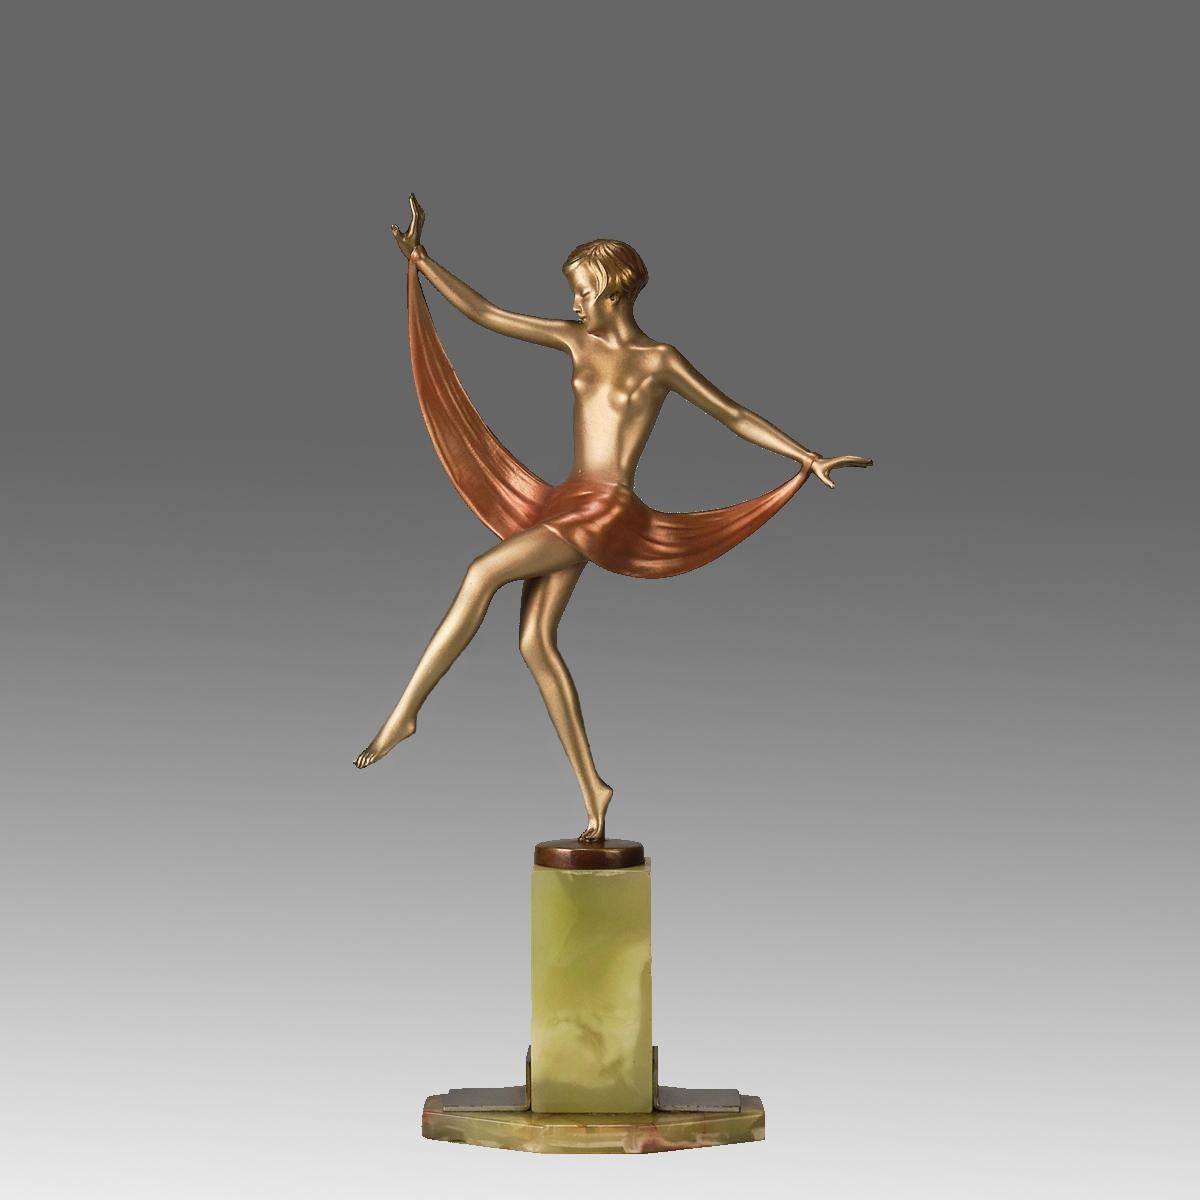 An impressive early 20th Century Art Deco cold painted giltand enamel bronze figure of a young energetic beauty in a balanced dancing pose with a scarf draped around her midriff. The bronze exhibiting excellent colour and very fine hand chased